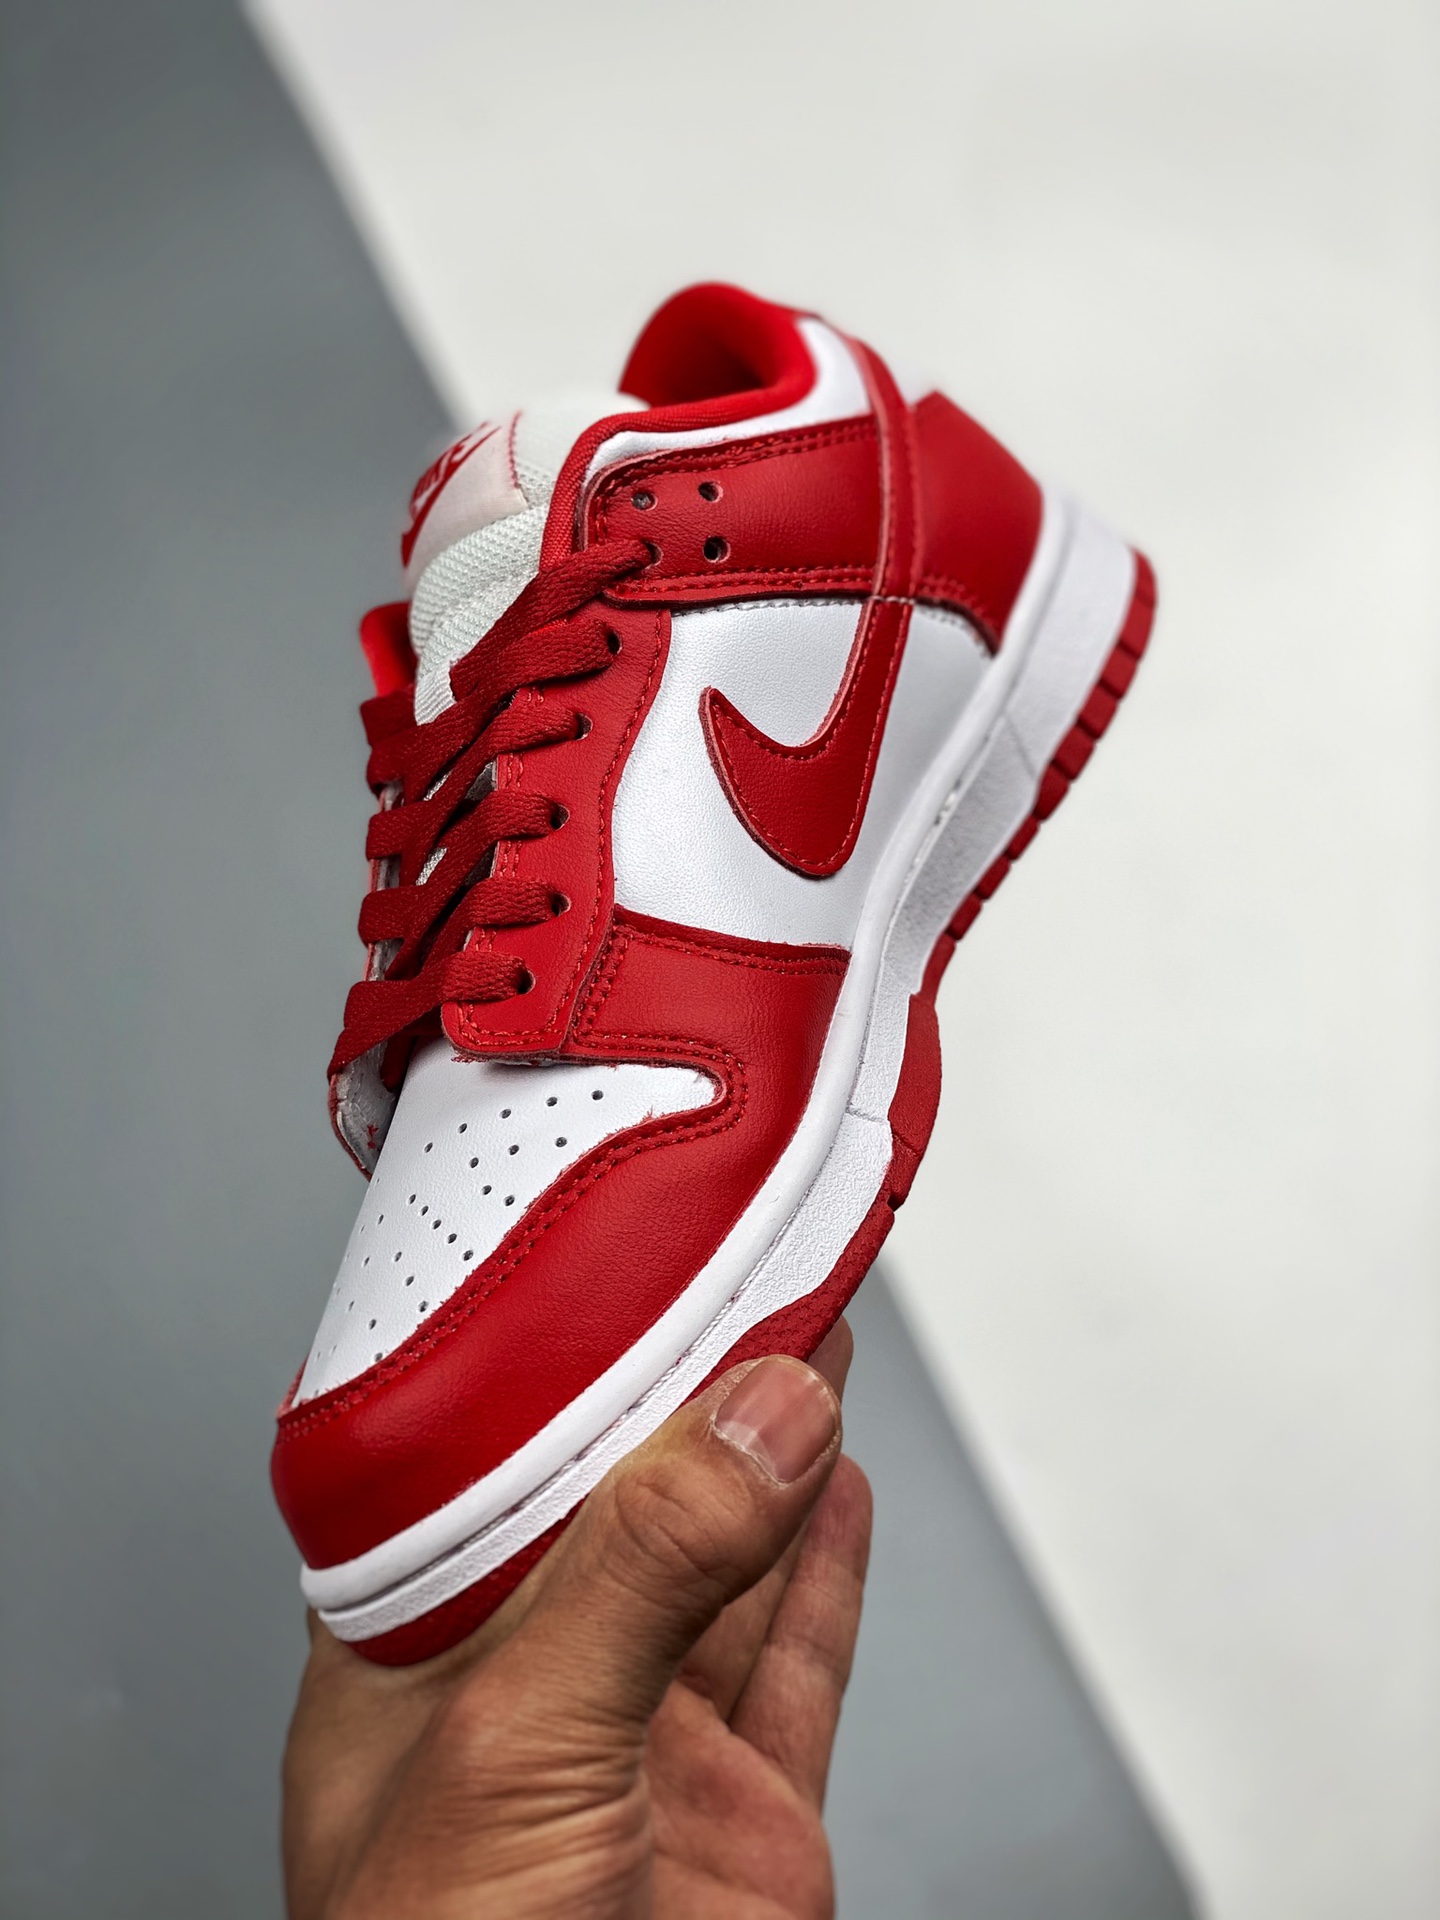 Nike Dunk Low SP White/University Red For Sale – Sneaker Hello